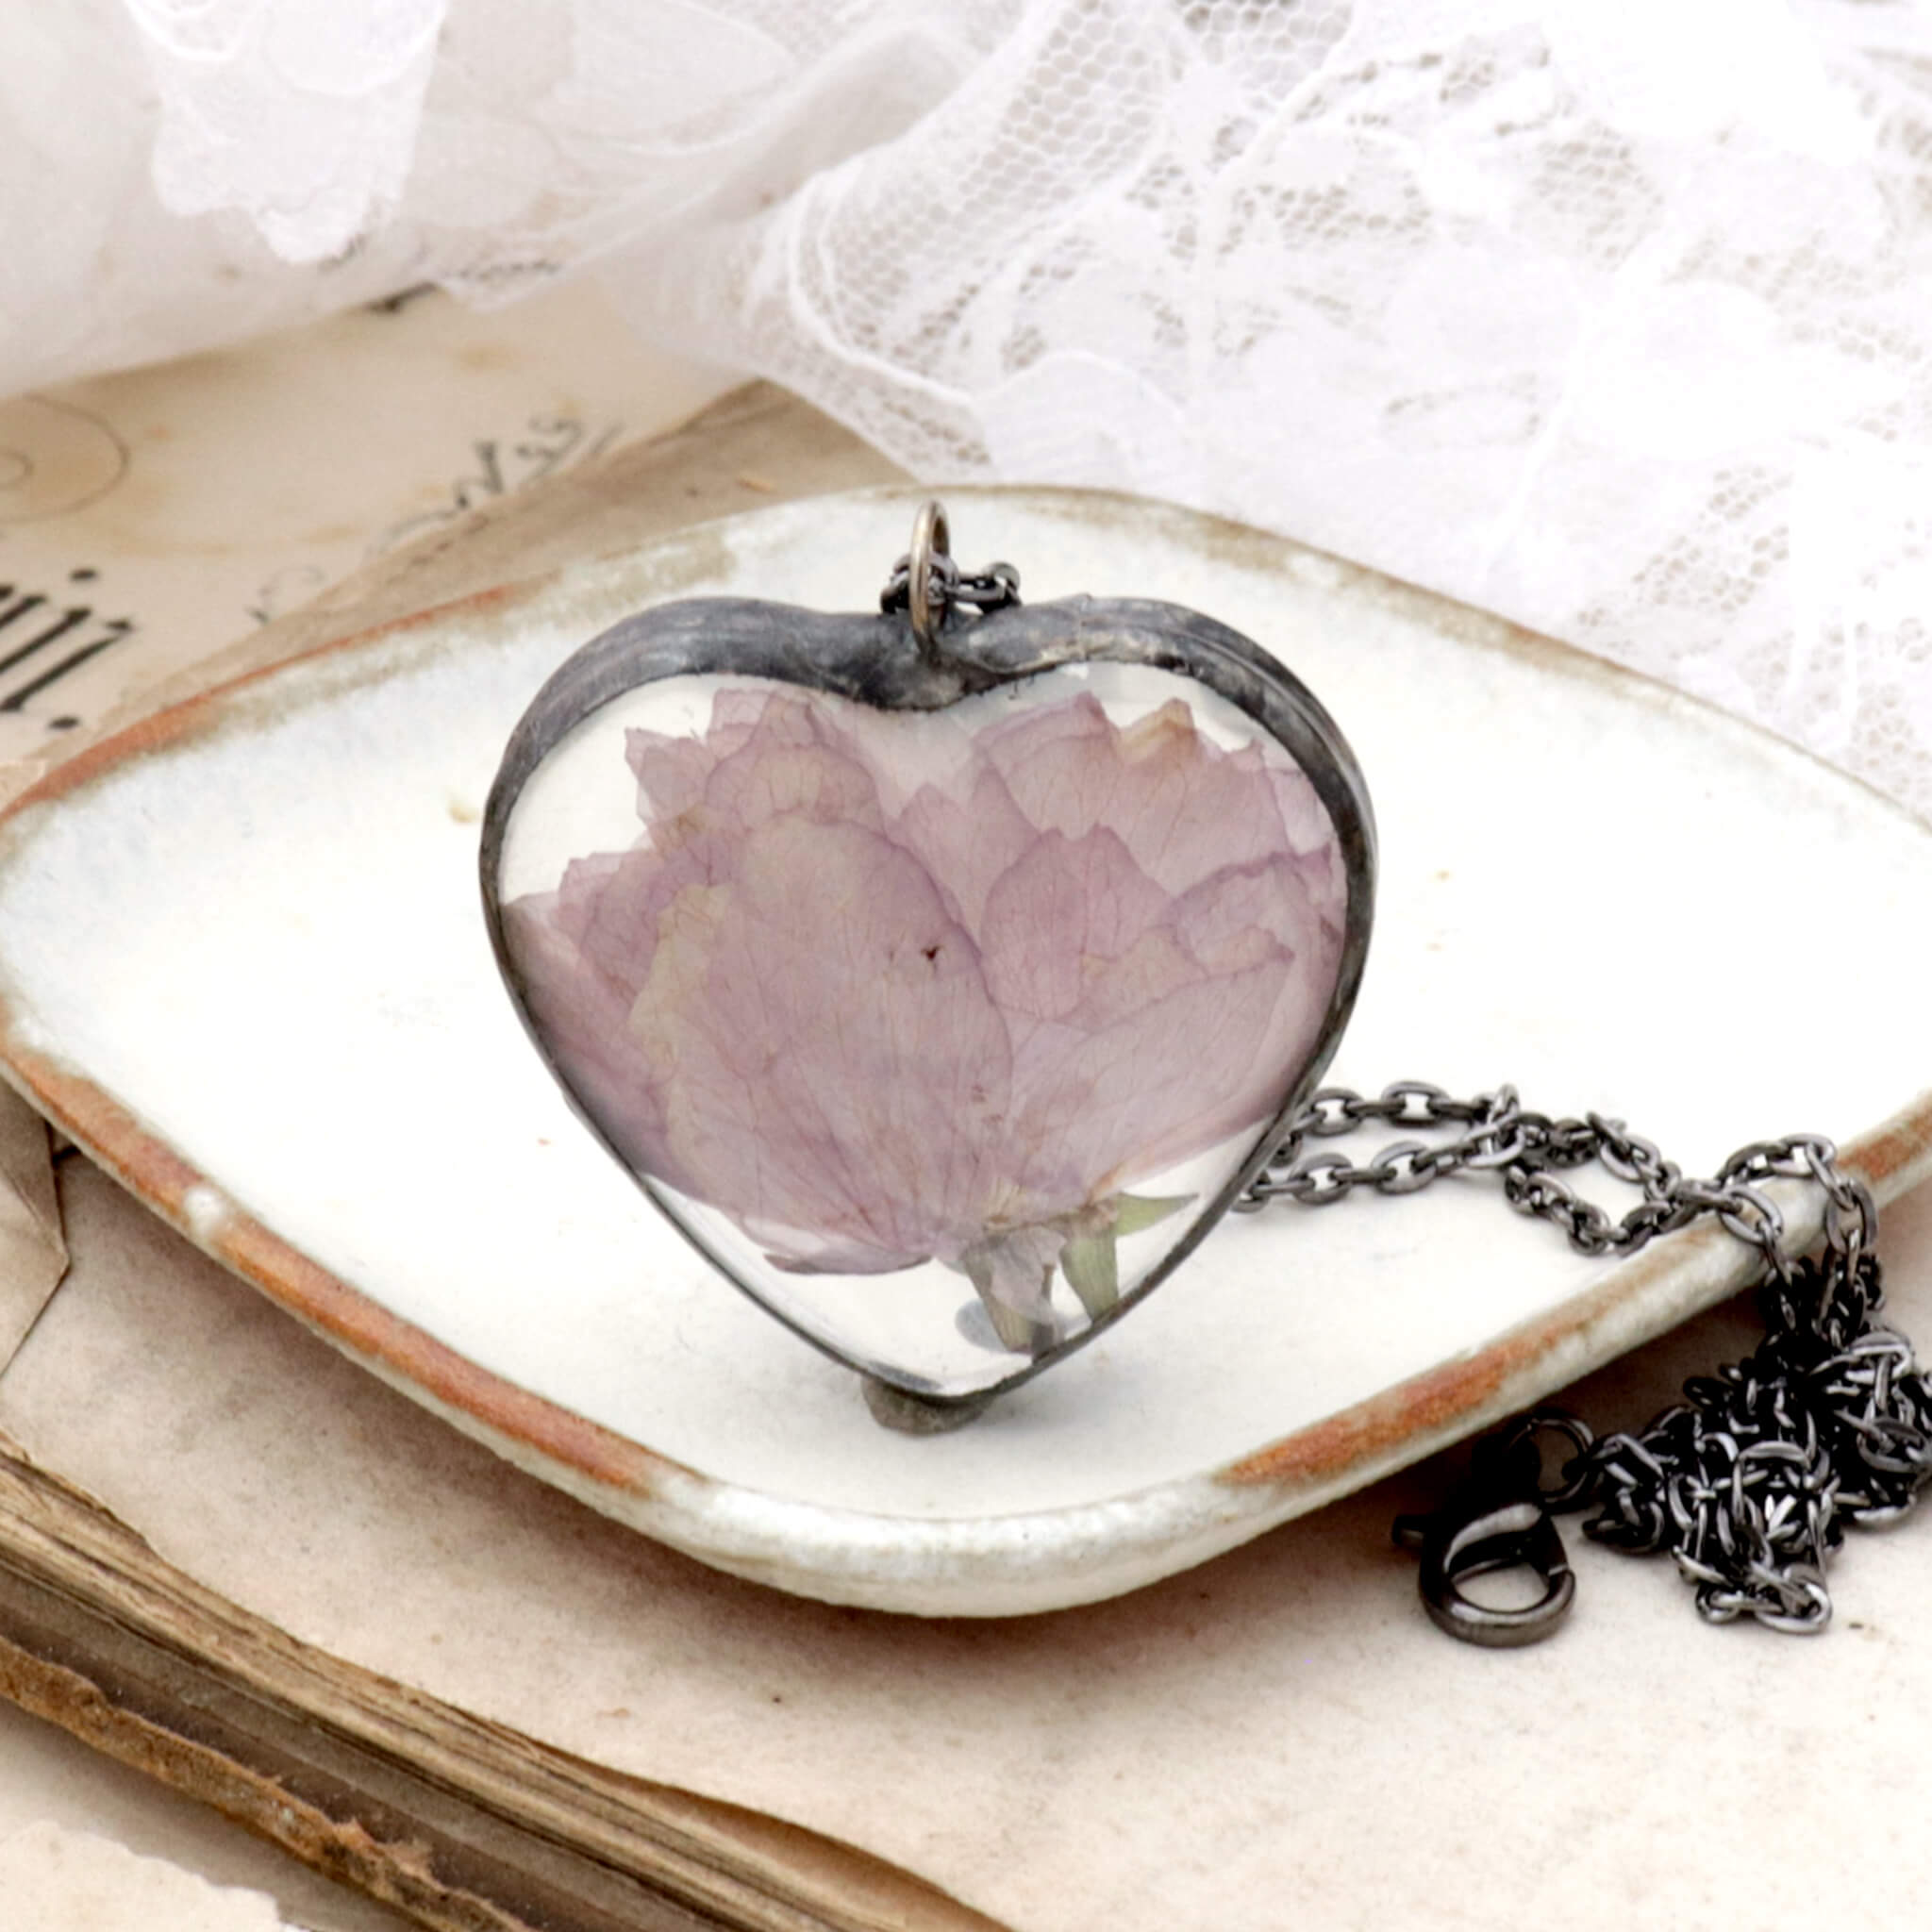 Heart shaped cherry blossom necklace standing on the edge on a little white dish